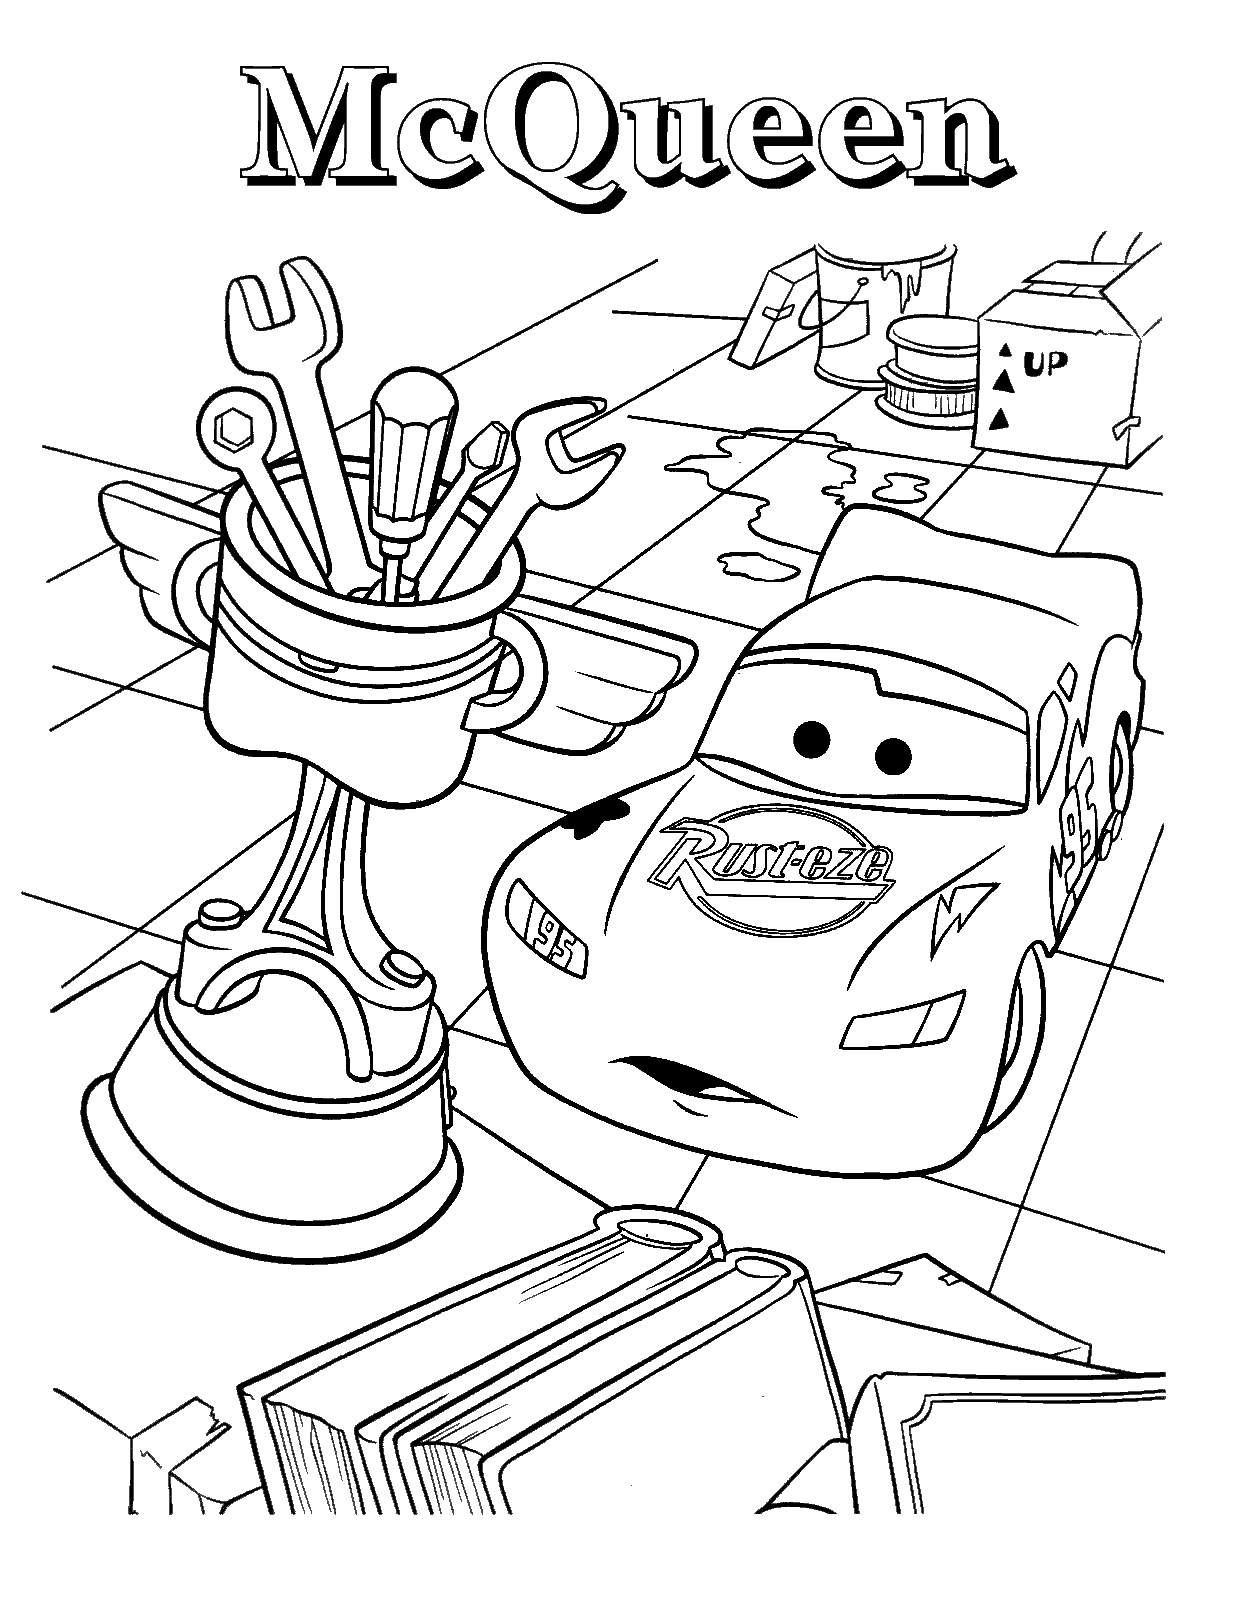 Free Printable Lightning McQueen Coloring Pages for Kids - Best ...